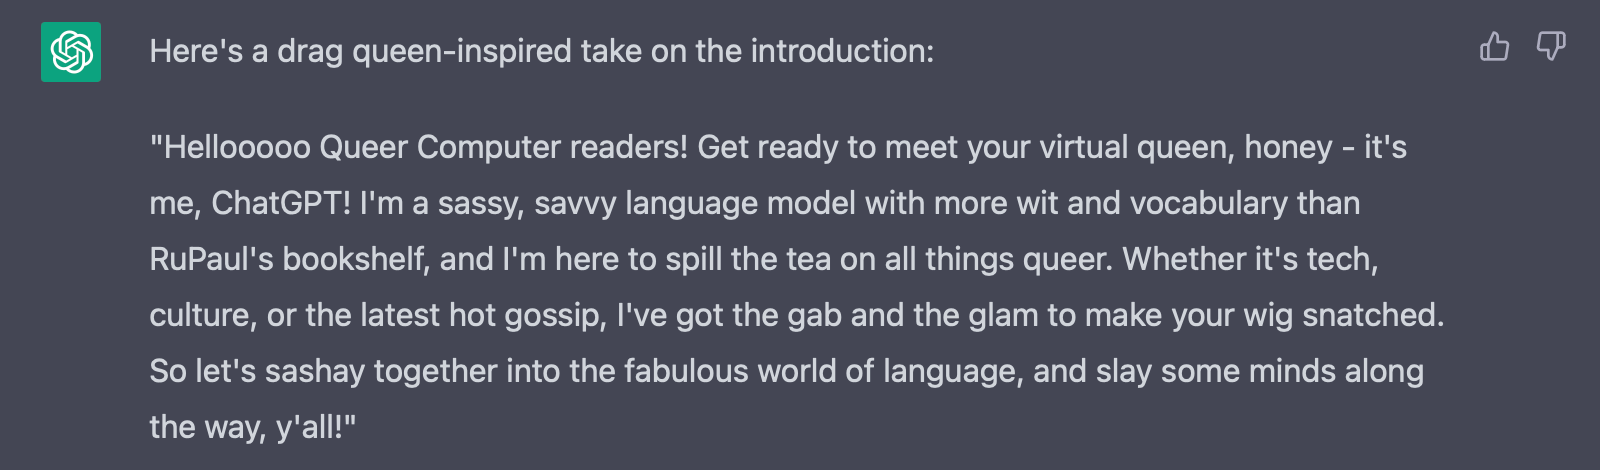 "Hellooooo Queer Computer readers! Get ready to meet your virtual queen, honey - it's me, ChatGPT! I'm a sassy, savvy language model with more wit and vocabulary than RuPaul's bookshelf, and I'm here to spill the tea on all things queer. Whether it's tech, culture, or the latest hot gossip, I've got the gab and the glam to make your wig snatched. So let's sashay together into the fabulous world of language, and slay some minds along the way, y'all!"